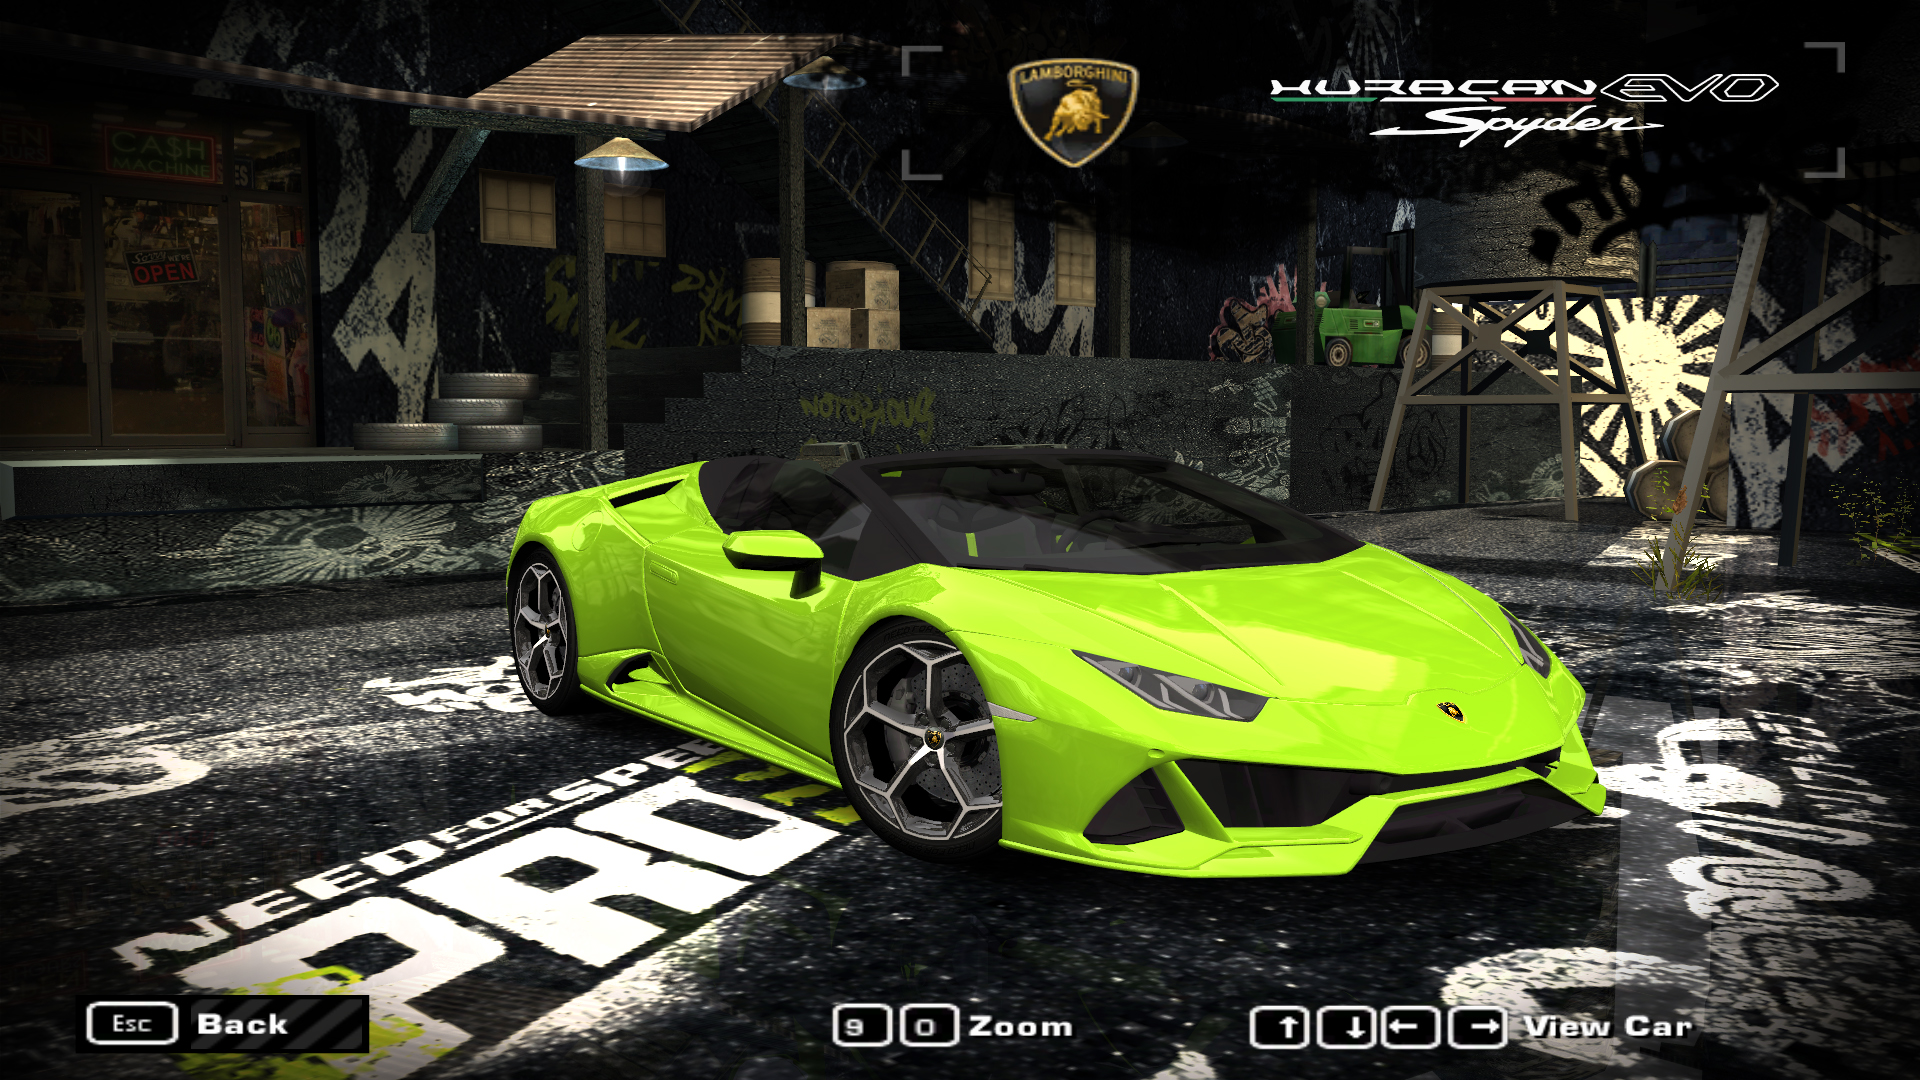 Need For Speed Most Wanted 2020 Lamborghini Huracan EVO Spyder